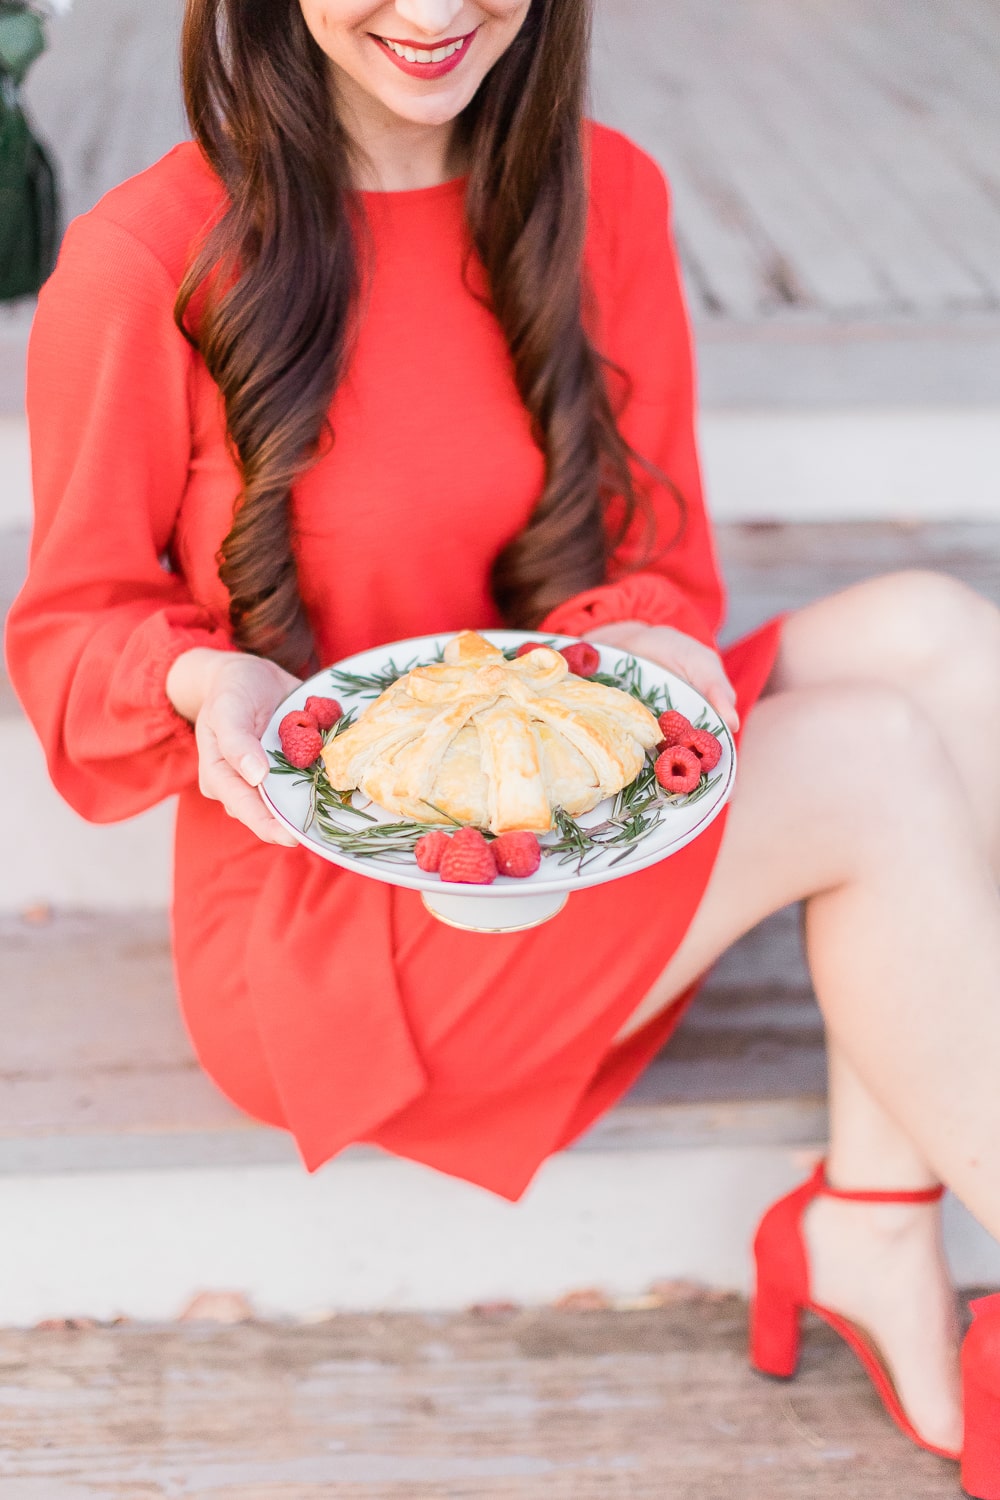 Blogger Stephanie Ziajka shares her recipe for a baked brie wheel with raspberry jelly on Diary of a Debutante